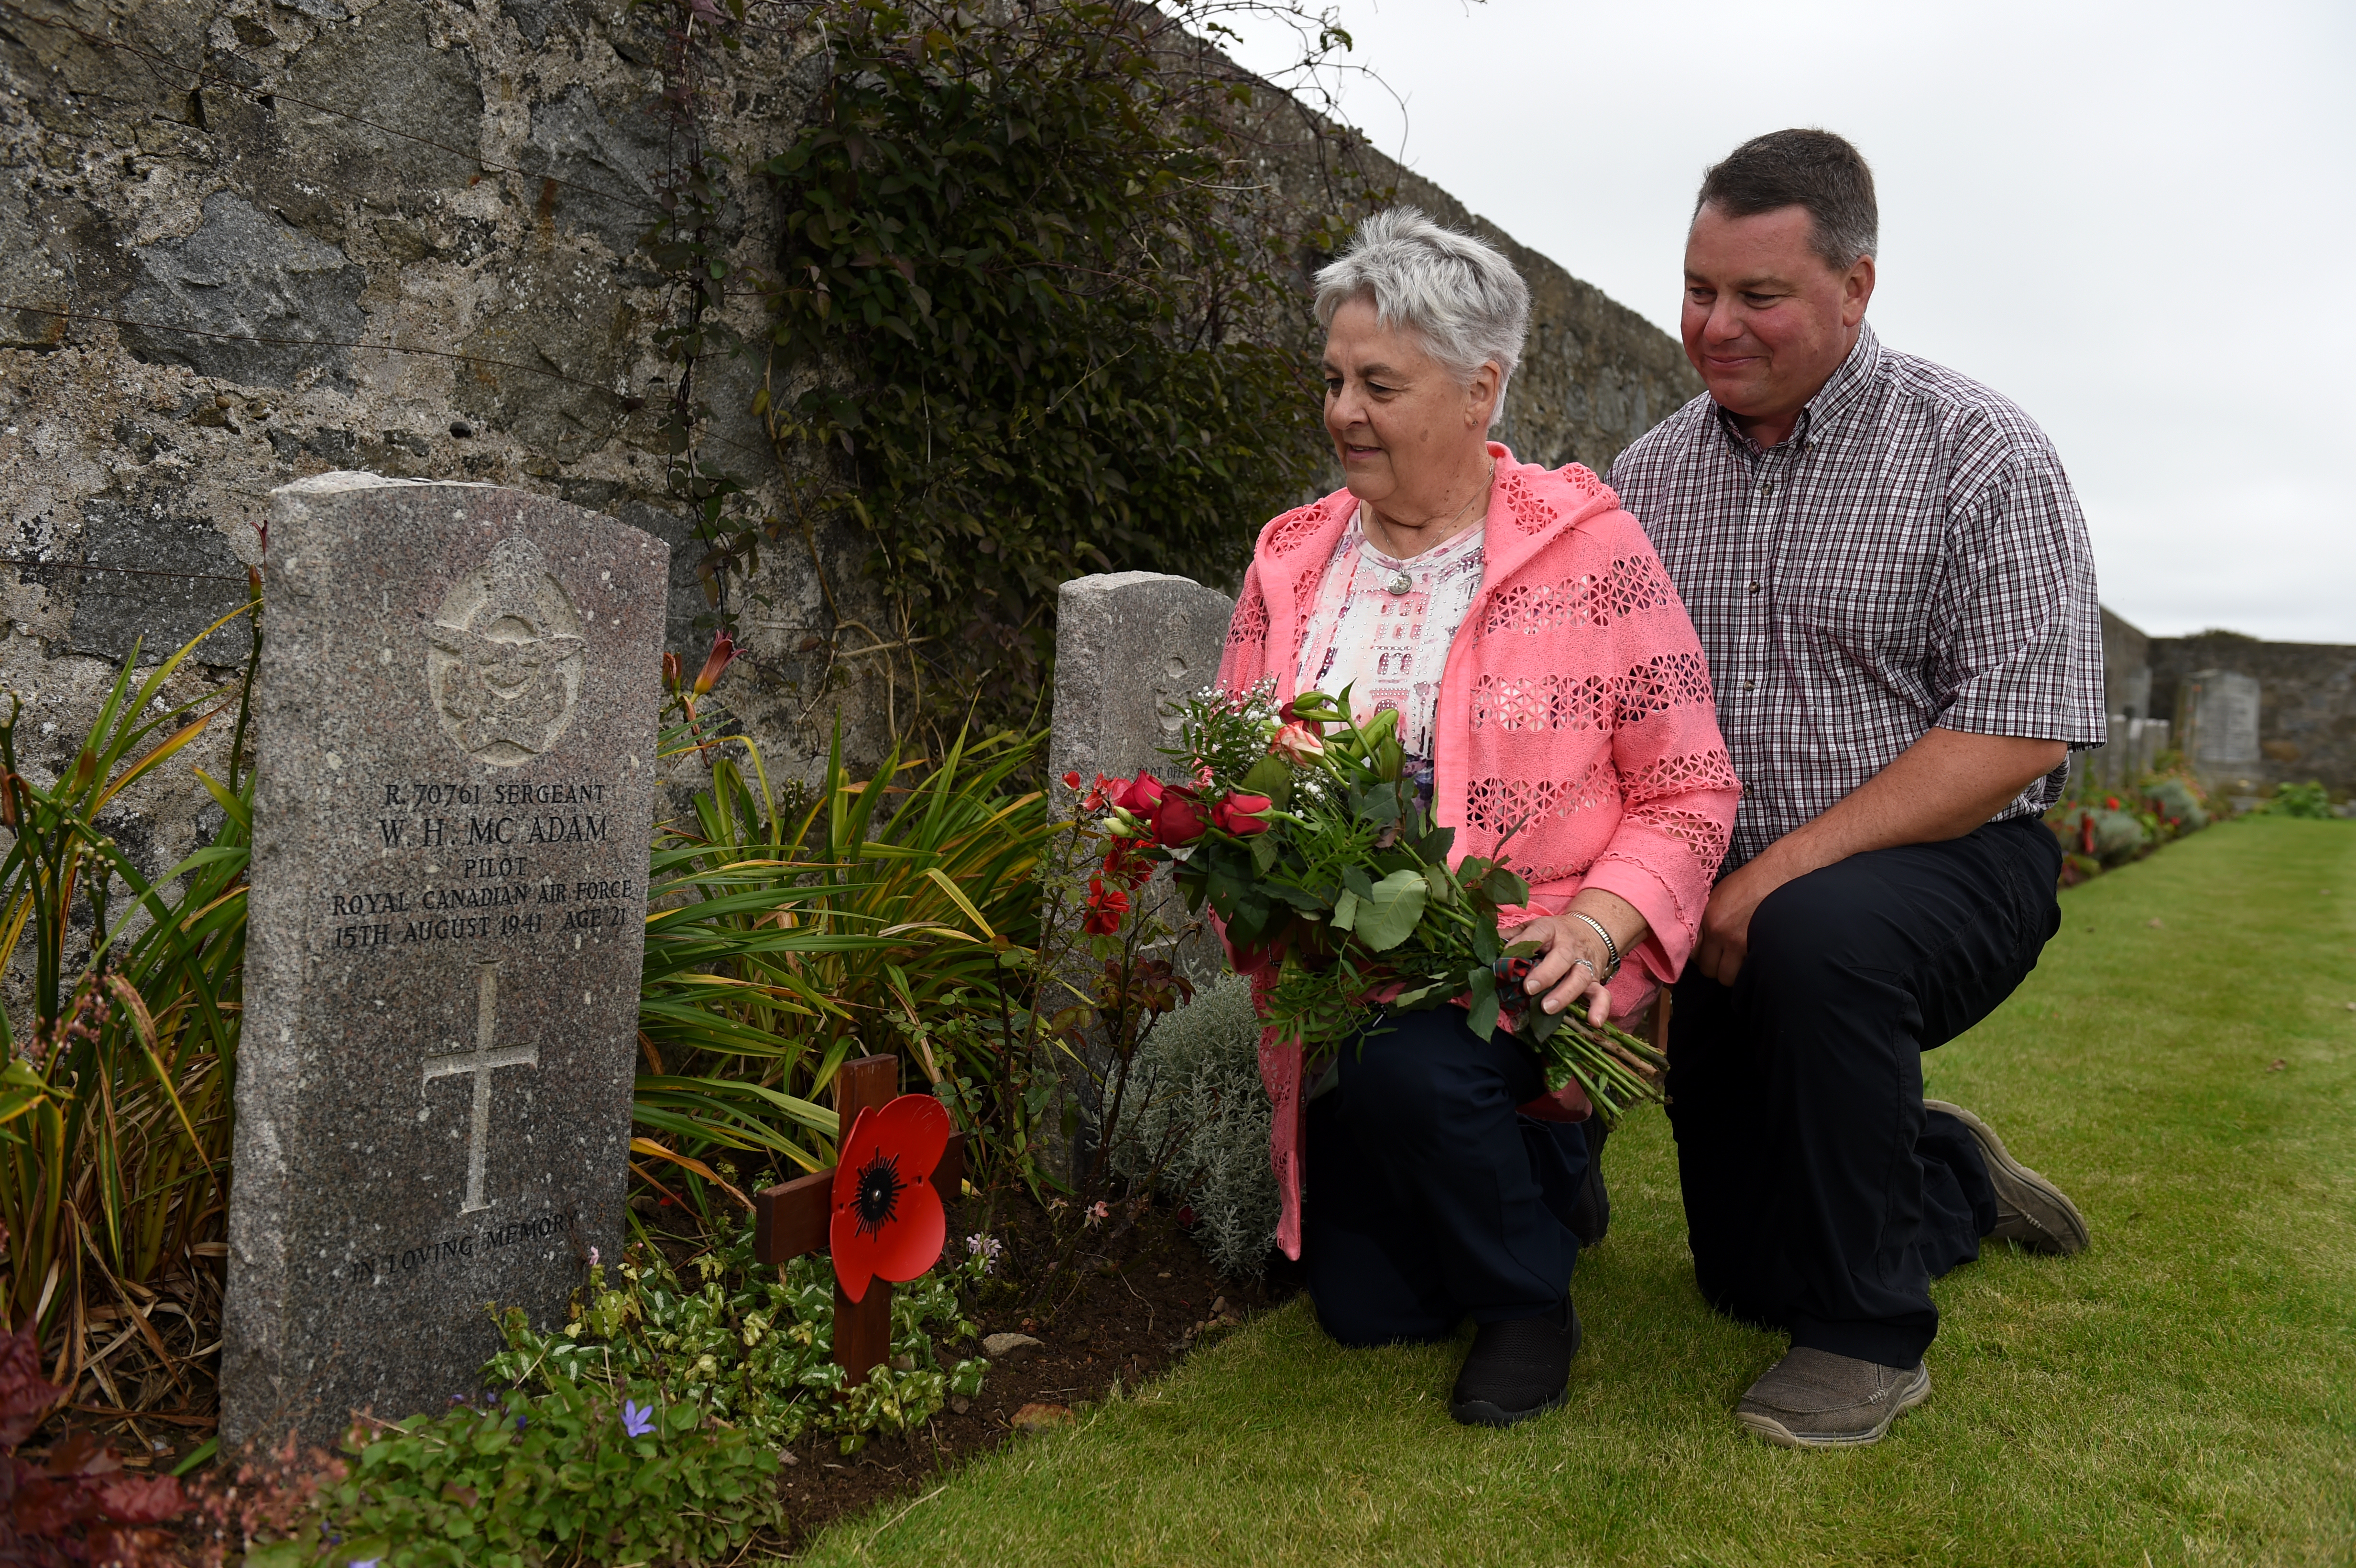 Louise Kurtz and son Jeffery Kurtz from Canada, visited the grave of her uncle who was sergeant Willaim McAdam, the first man to be killed flying over Peterhead in 1941 who is buried at Longside cemetery after crashing at a farm near Crimond. 

Picture by KENNY ELRICK     03/09/2019